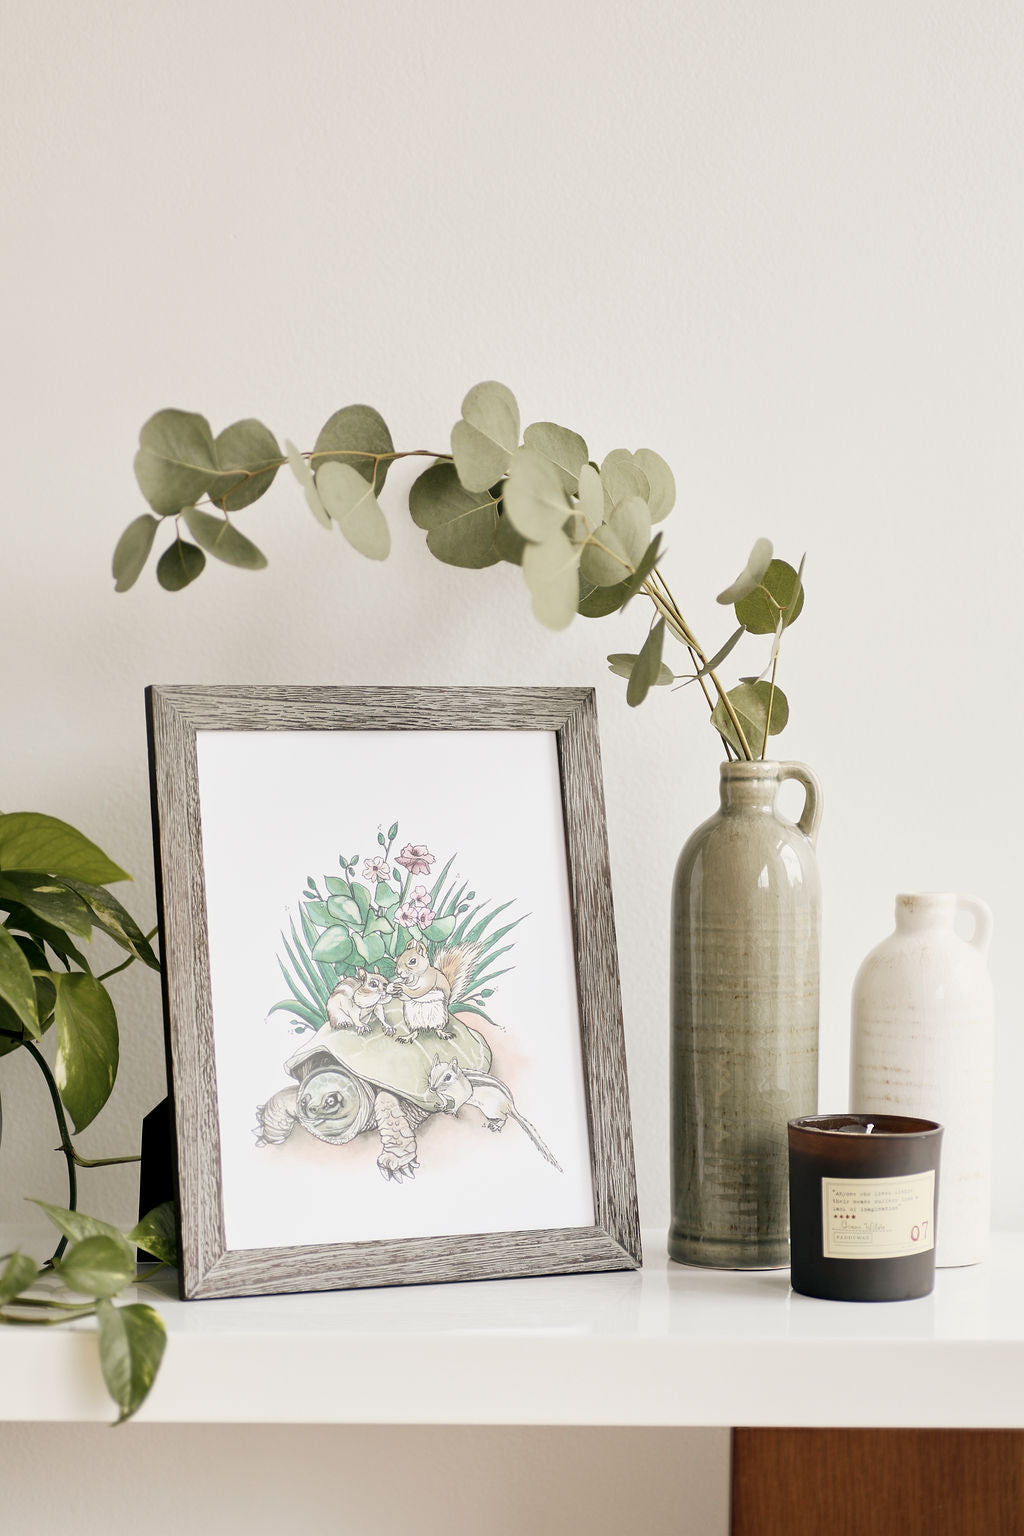 Shop Art Prints from Canadian artists at boogie + birdie in Ottawa. Framed Kelly Dixon watercolour art print with turtle and group of chipmunks on its back.